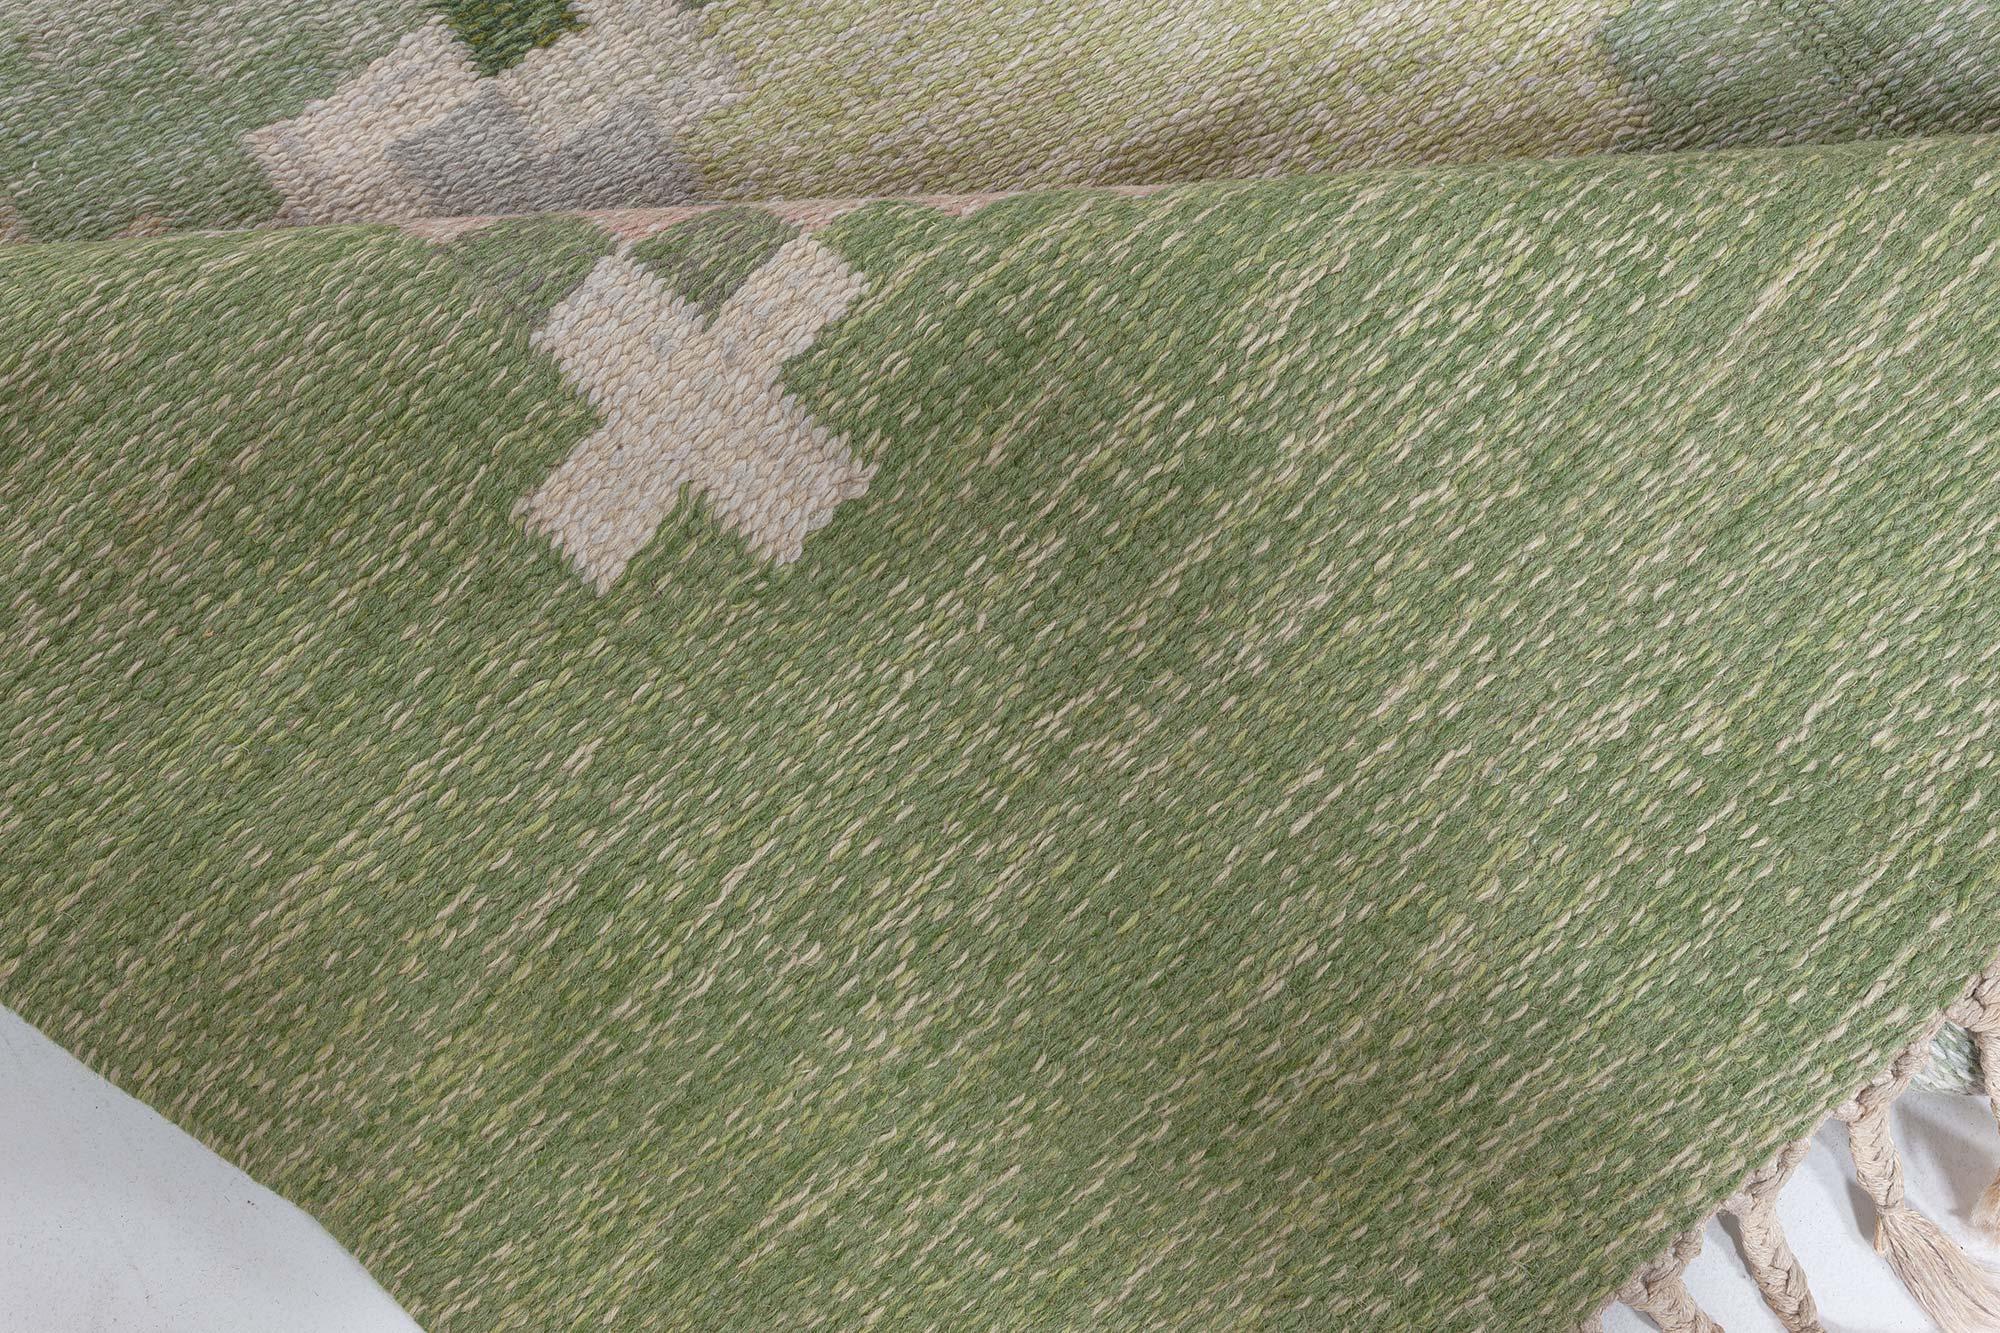 Mid-20th Century Swedish Pea Green Background Flat Weave Rug by Ingegerd Silow For Sale 1